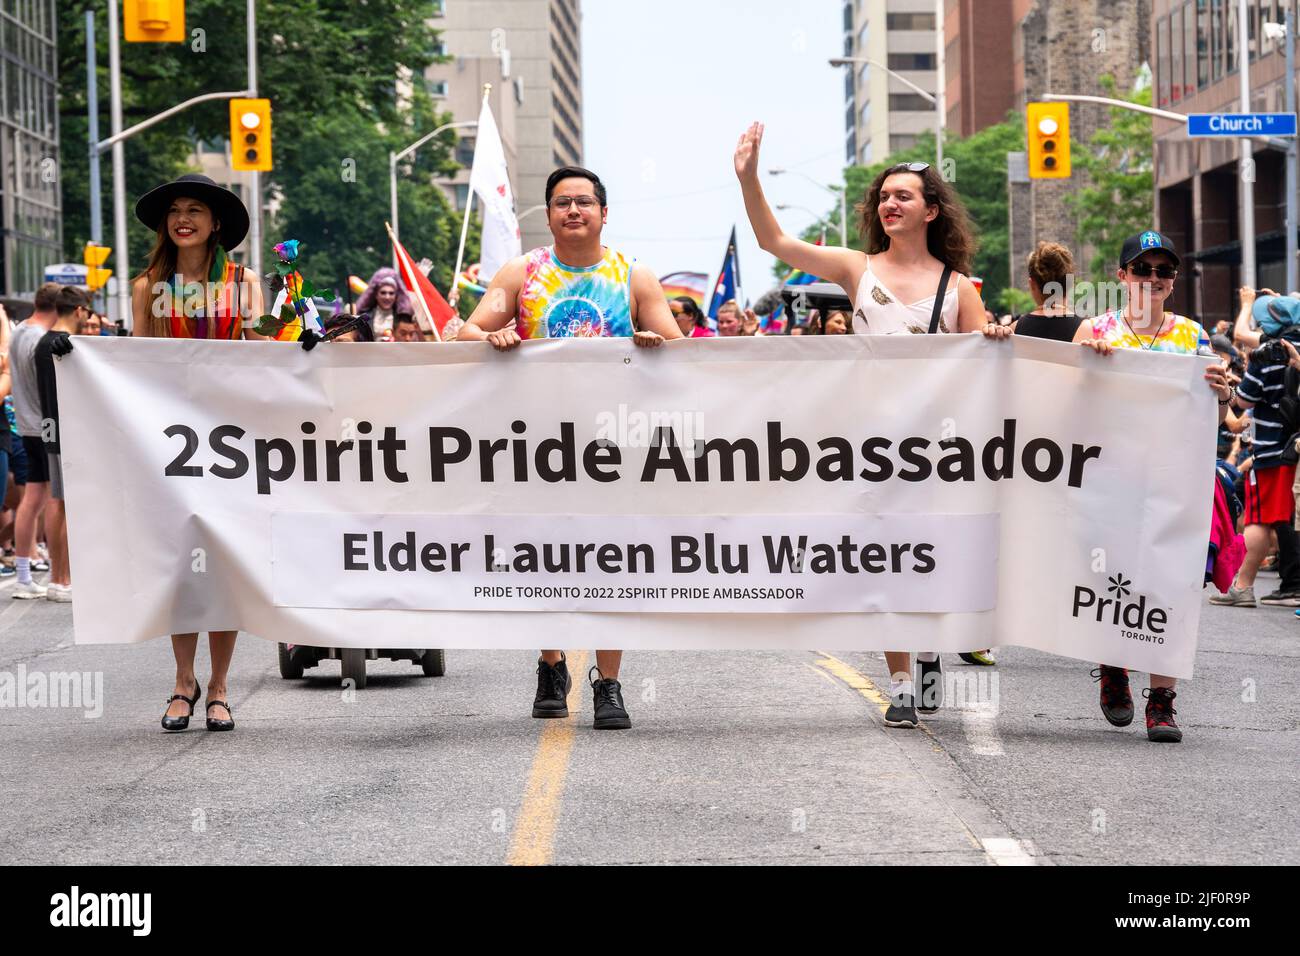 A group of people holding a banner announcing the 2Spirit Pride Ambassador Elder Lauren Blue Waters. They are marching in Bloor Street during Pride Pa Stock Photo